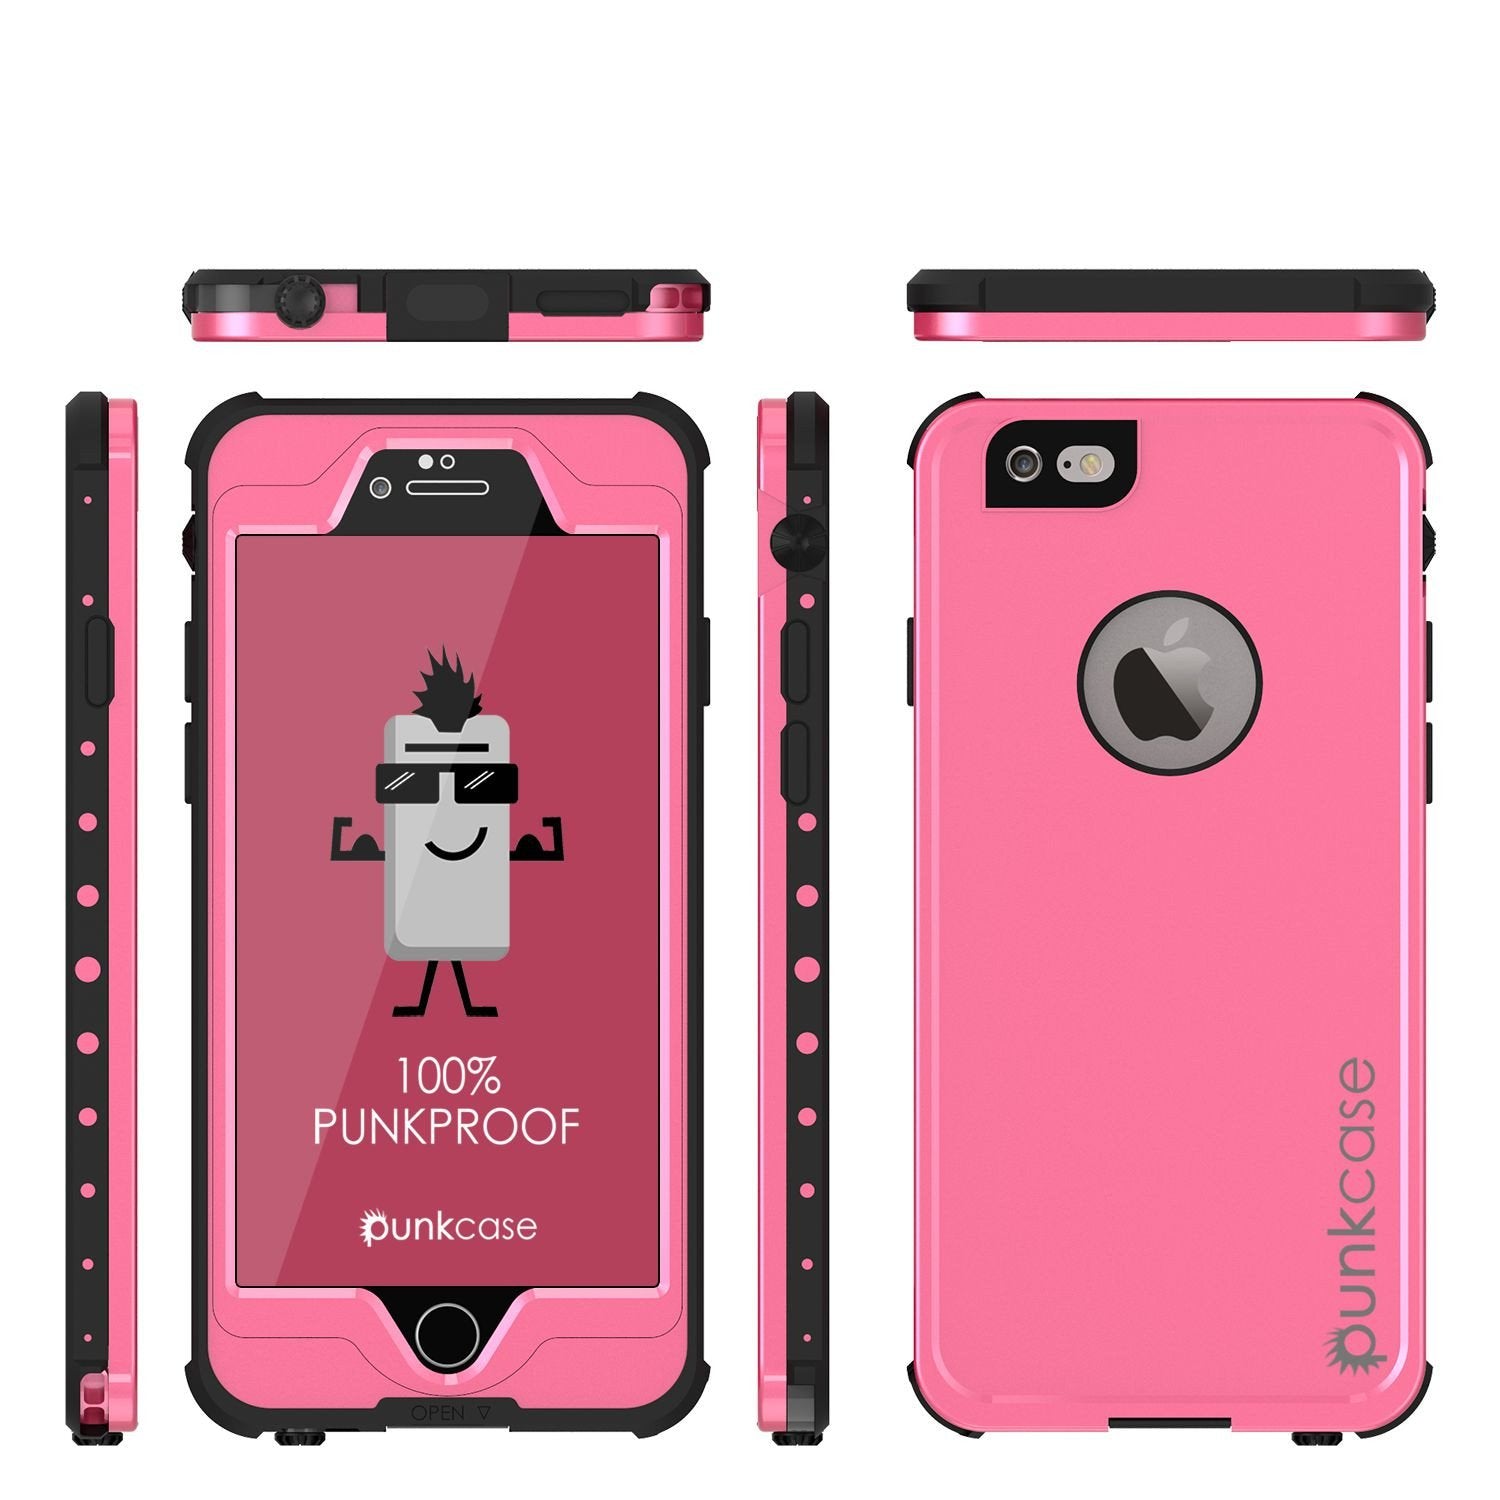 iPhone 6S+/6+ Plus Waterproof Case, PUNKcase StudStar Pink w/ Attached Screen Protector | Warranty